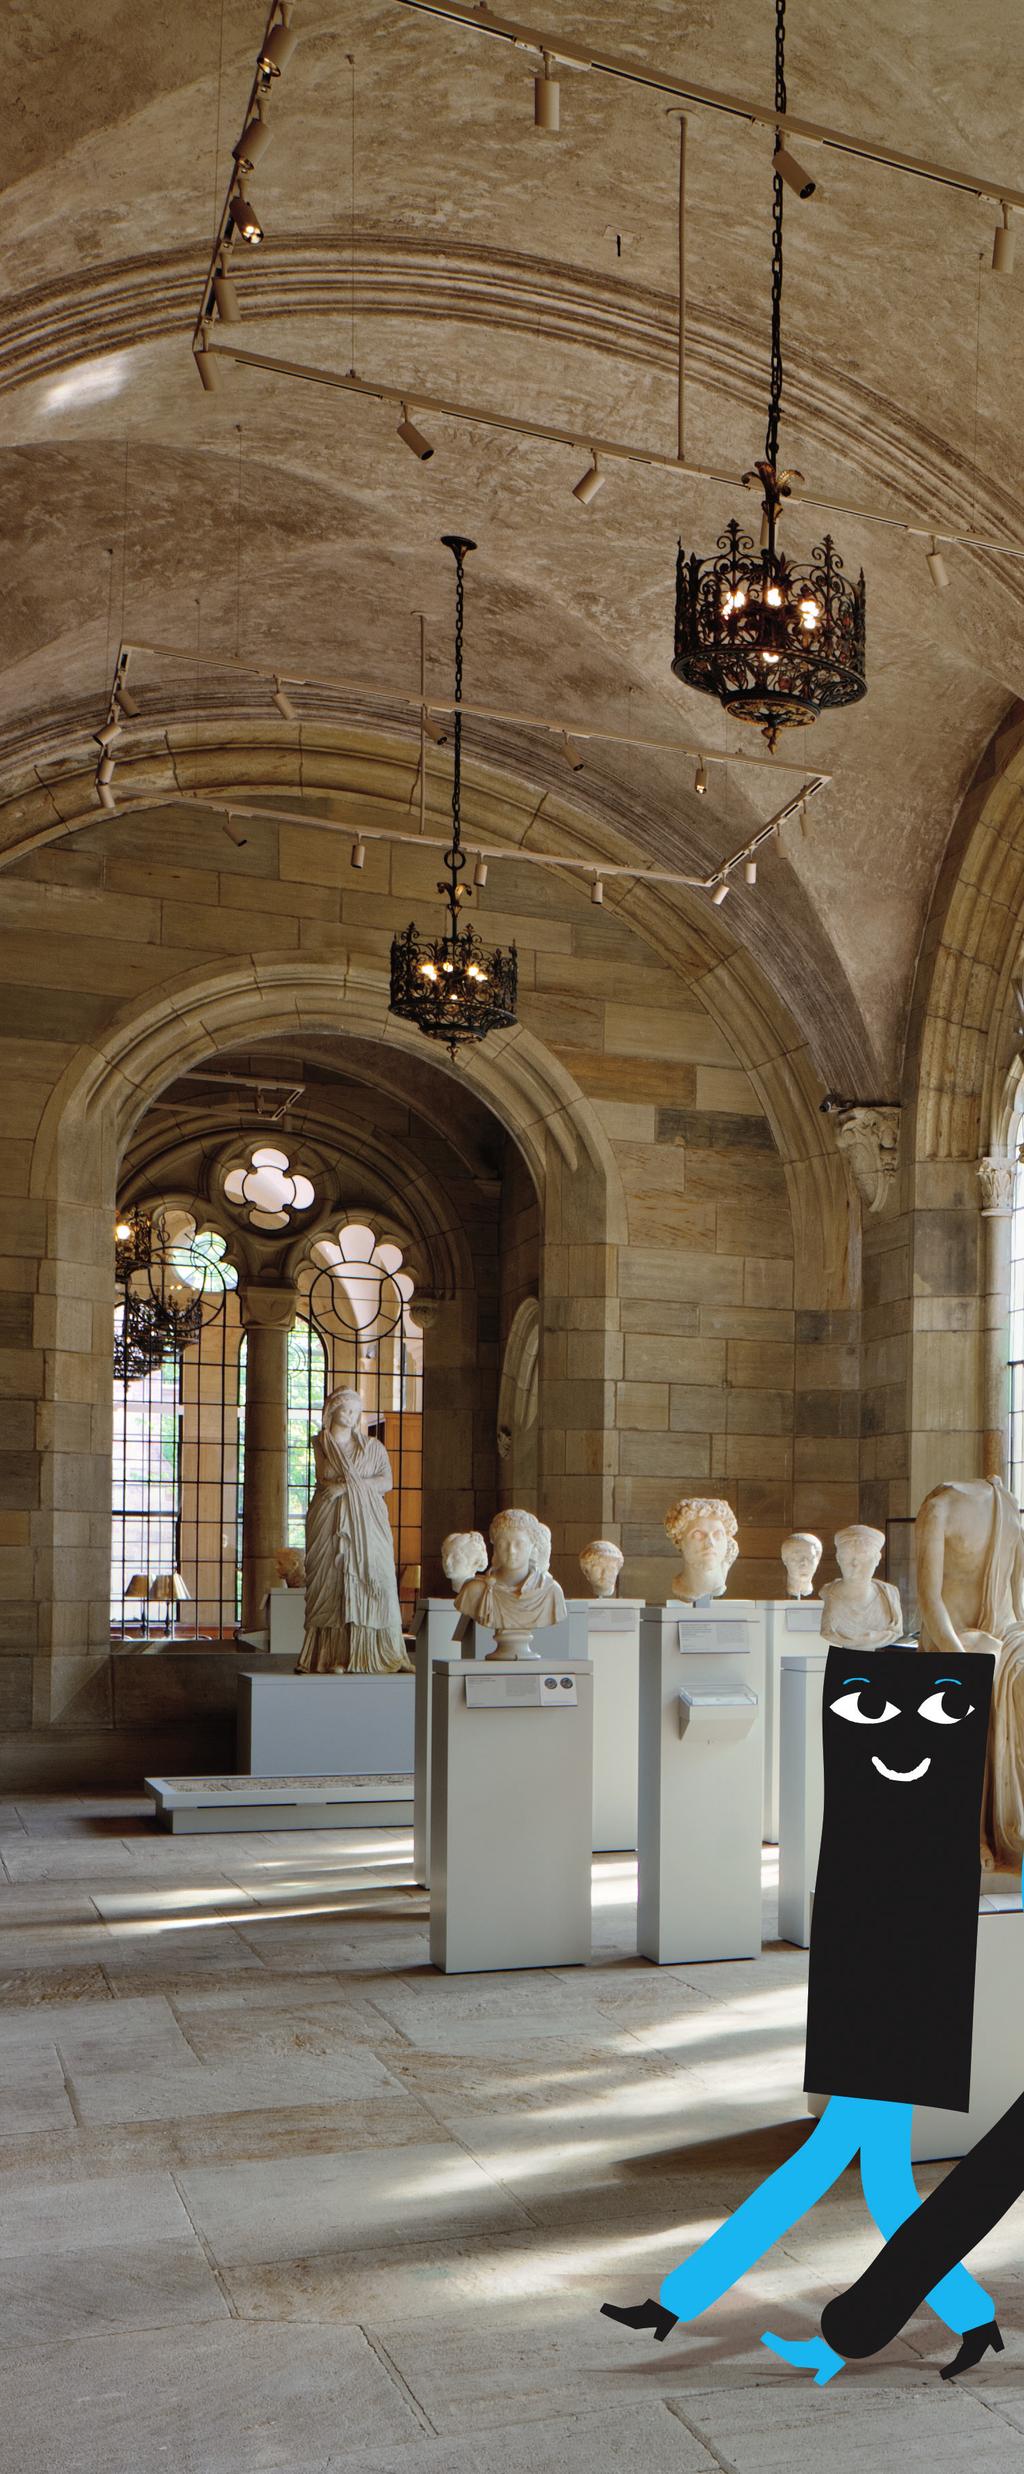 Welcome to the Yale University Art Gallery! This museum displays works of art from many cultures and time periods.